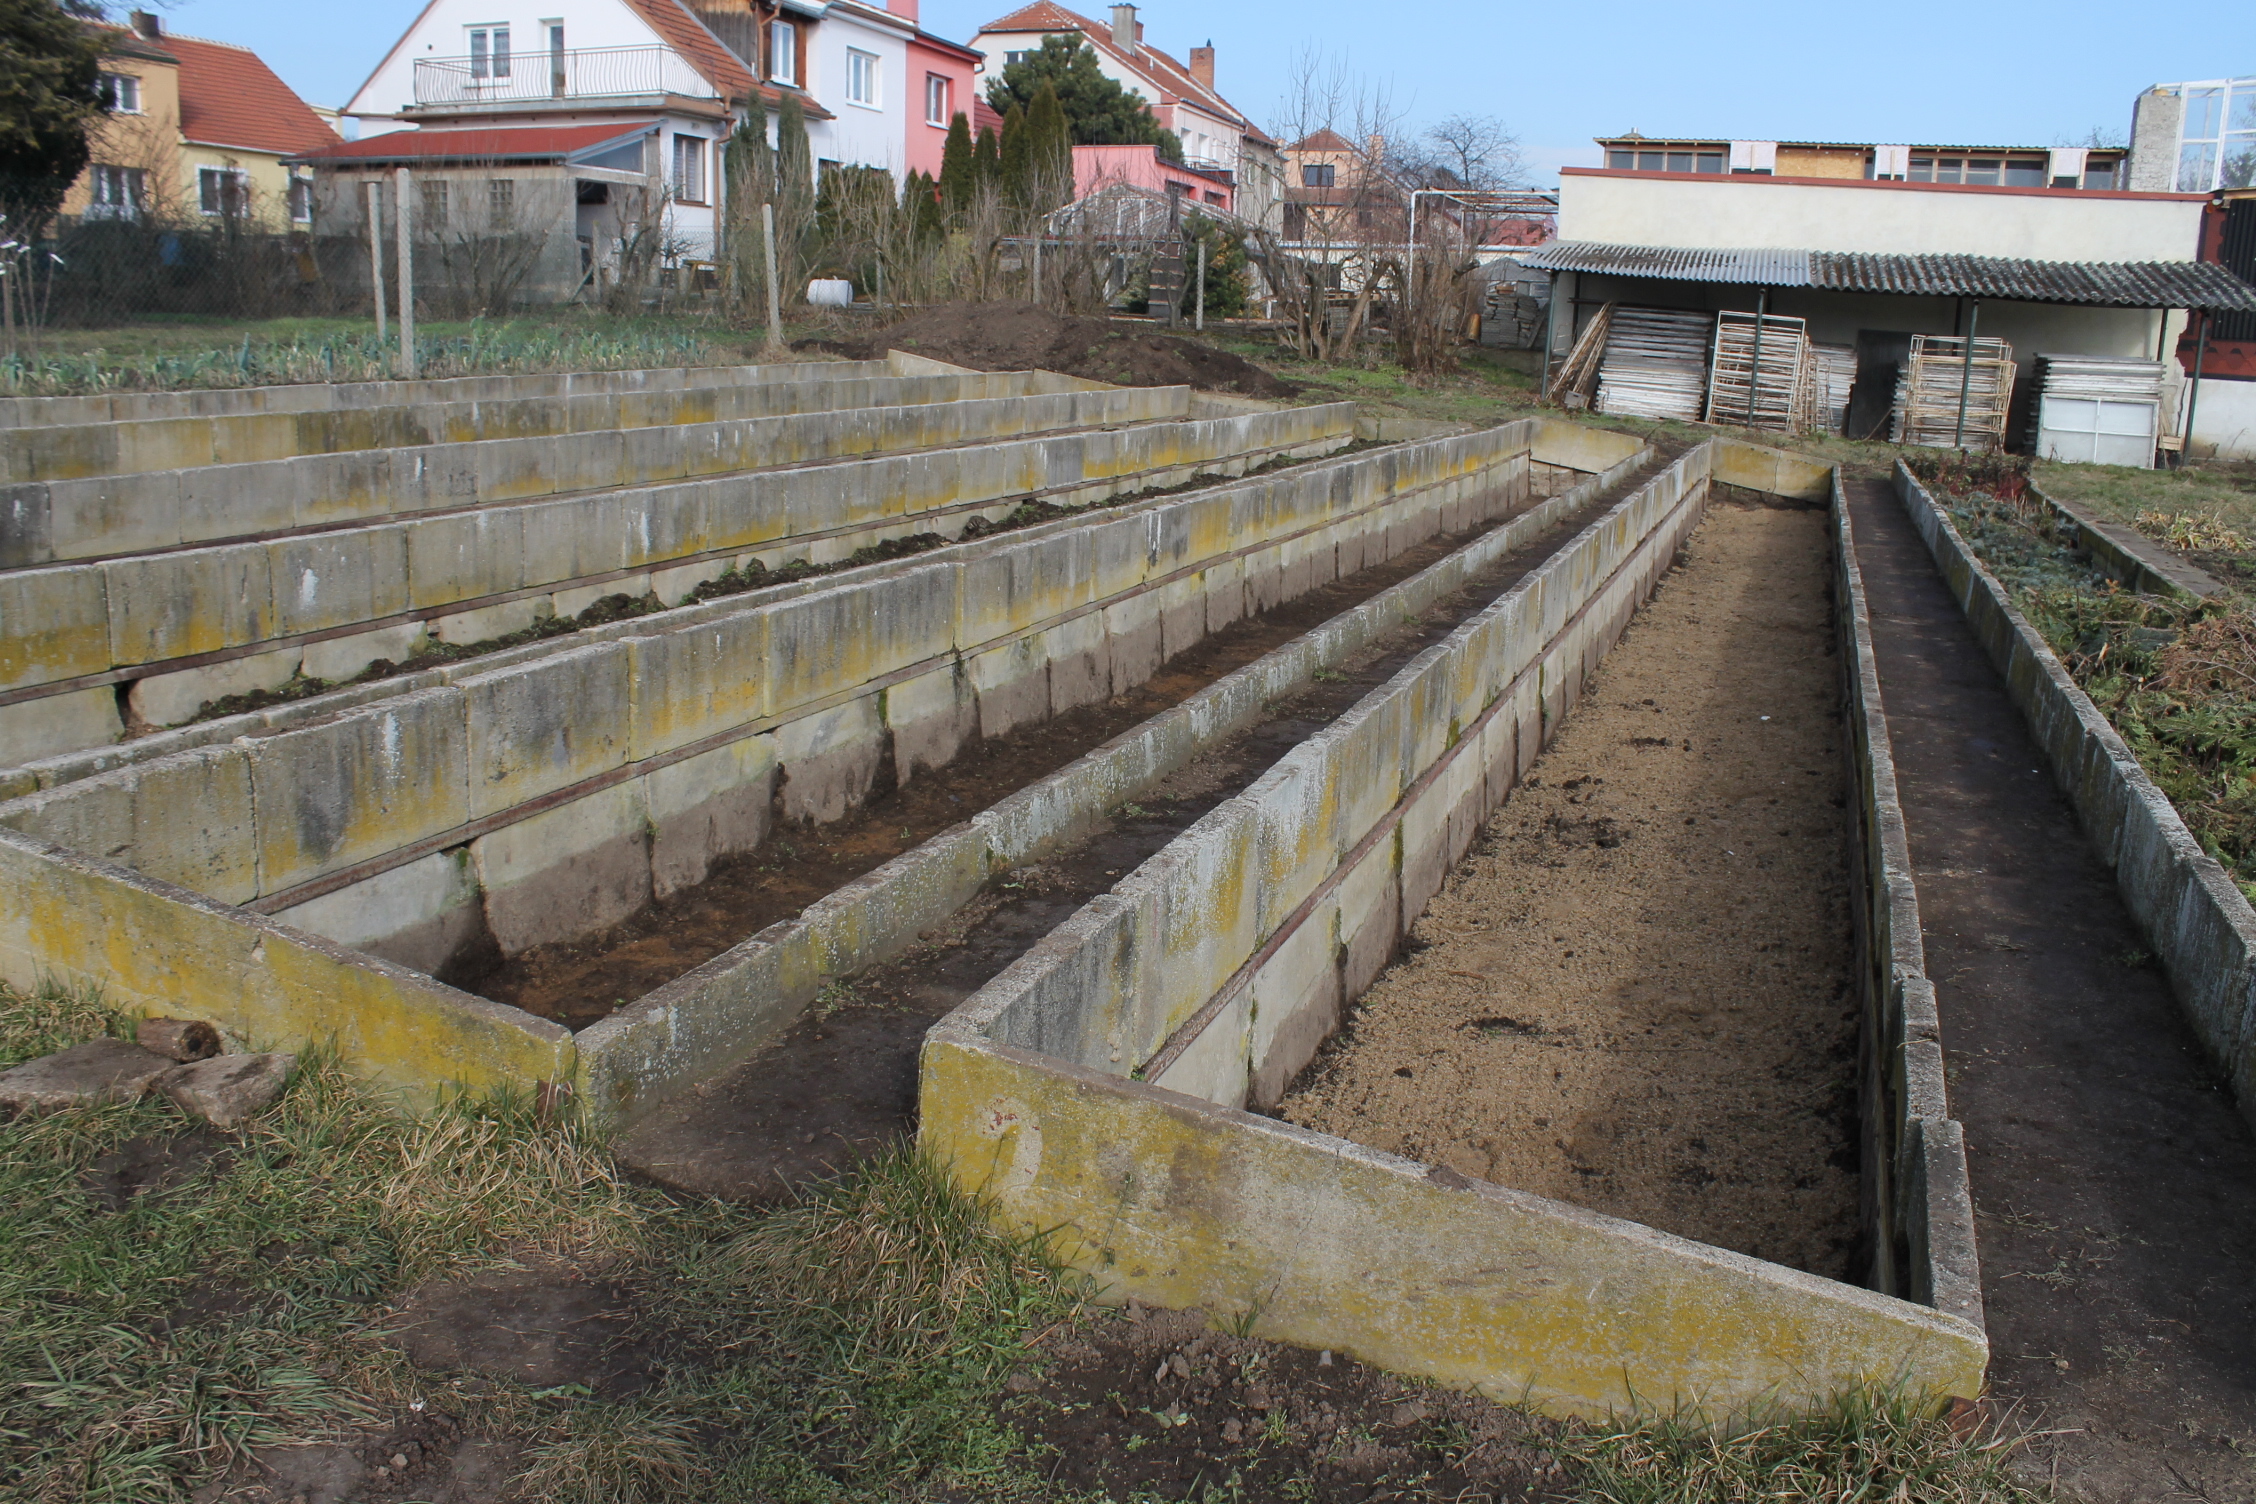 You can still find old commercial cold frames in Patchogue and in Westchester. Note how these 4-inch-thick concrete block frames are angled to take advantage of the winter sun. The sashes are stored and staked in the background shed. These may have been used for pansy production, forcing spring bulbs in midwinter or overwintering perennials.  With the north ends (back) bermed and the south ends below grade, there is a certain about of natural insulation.